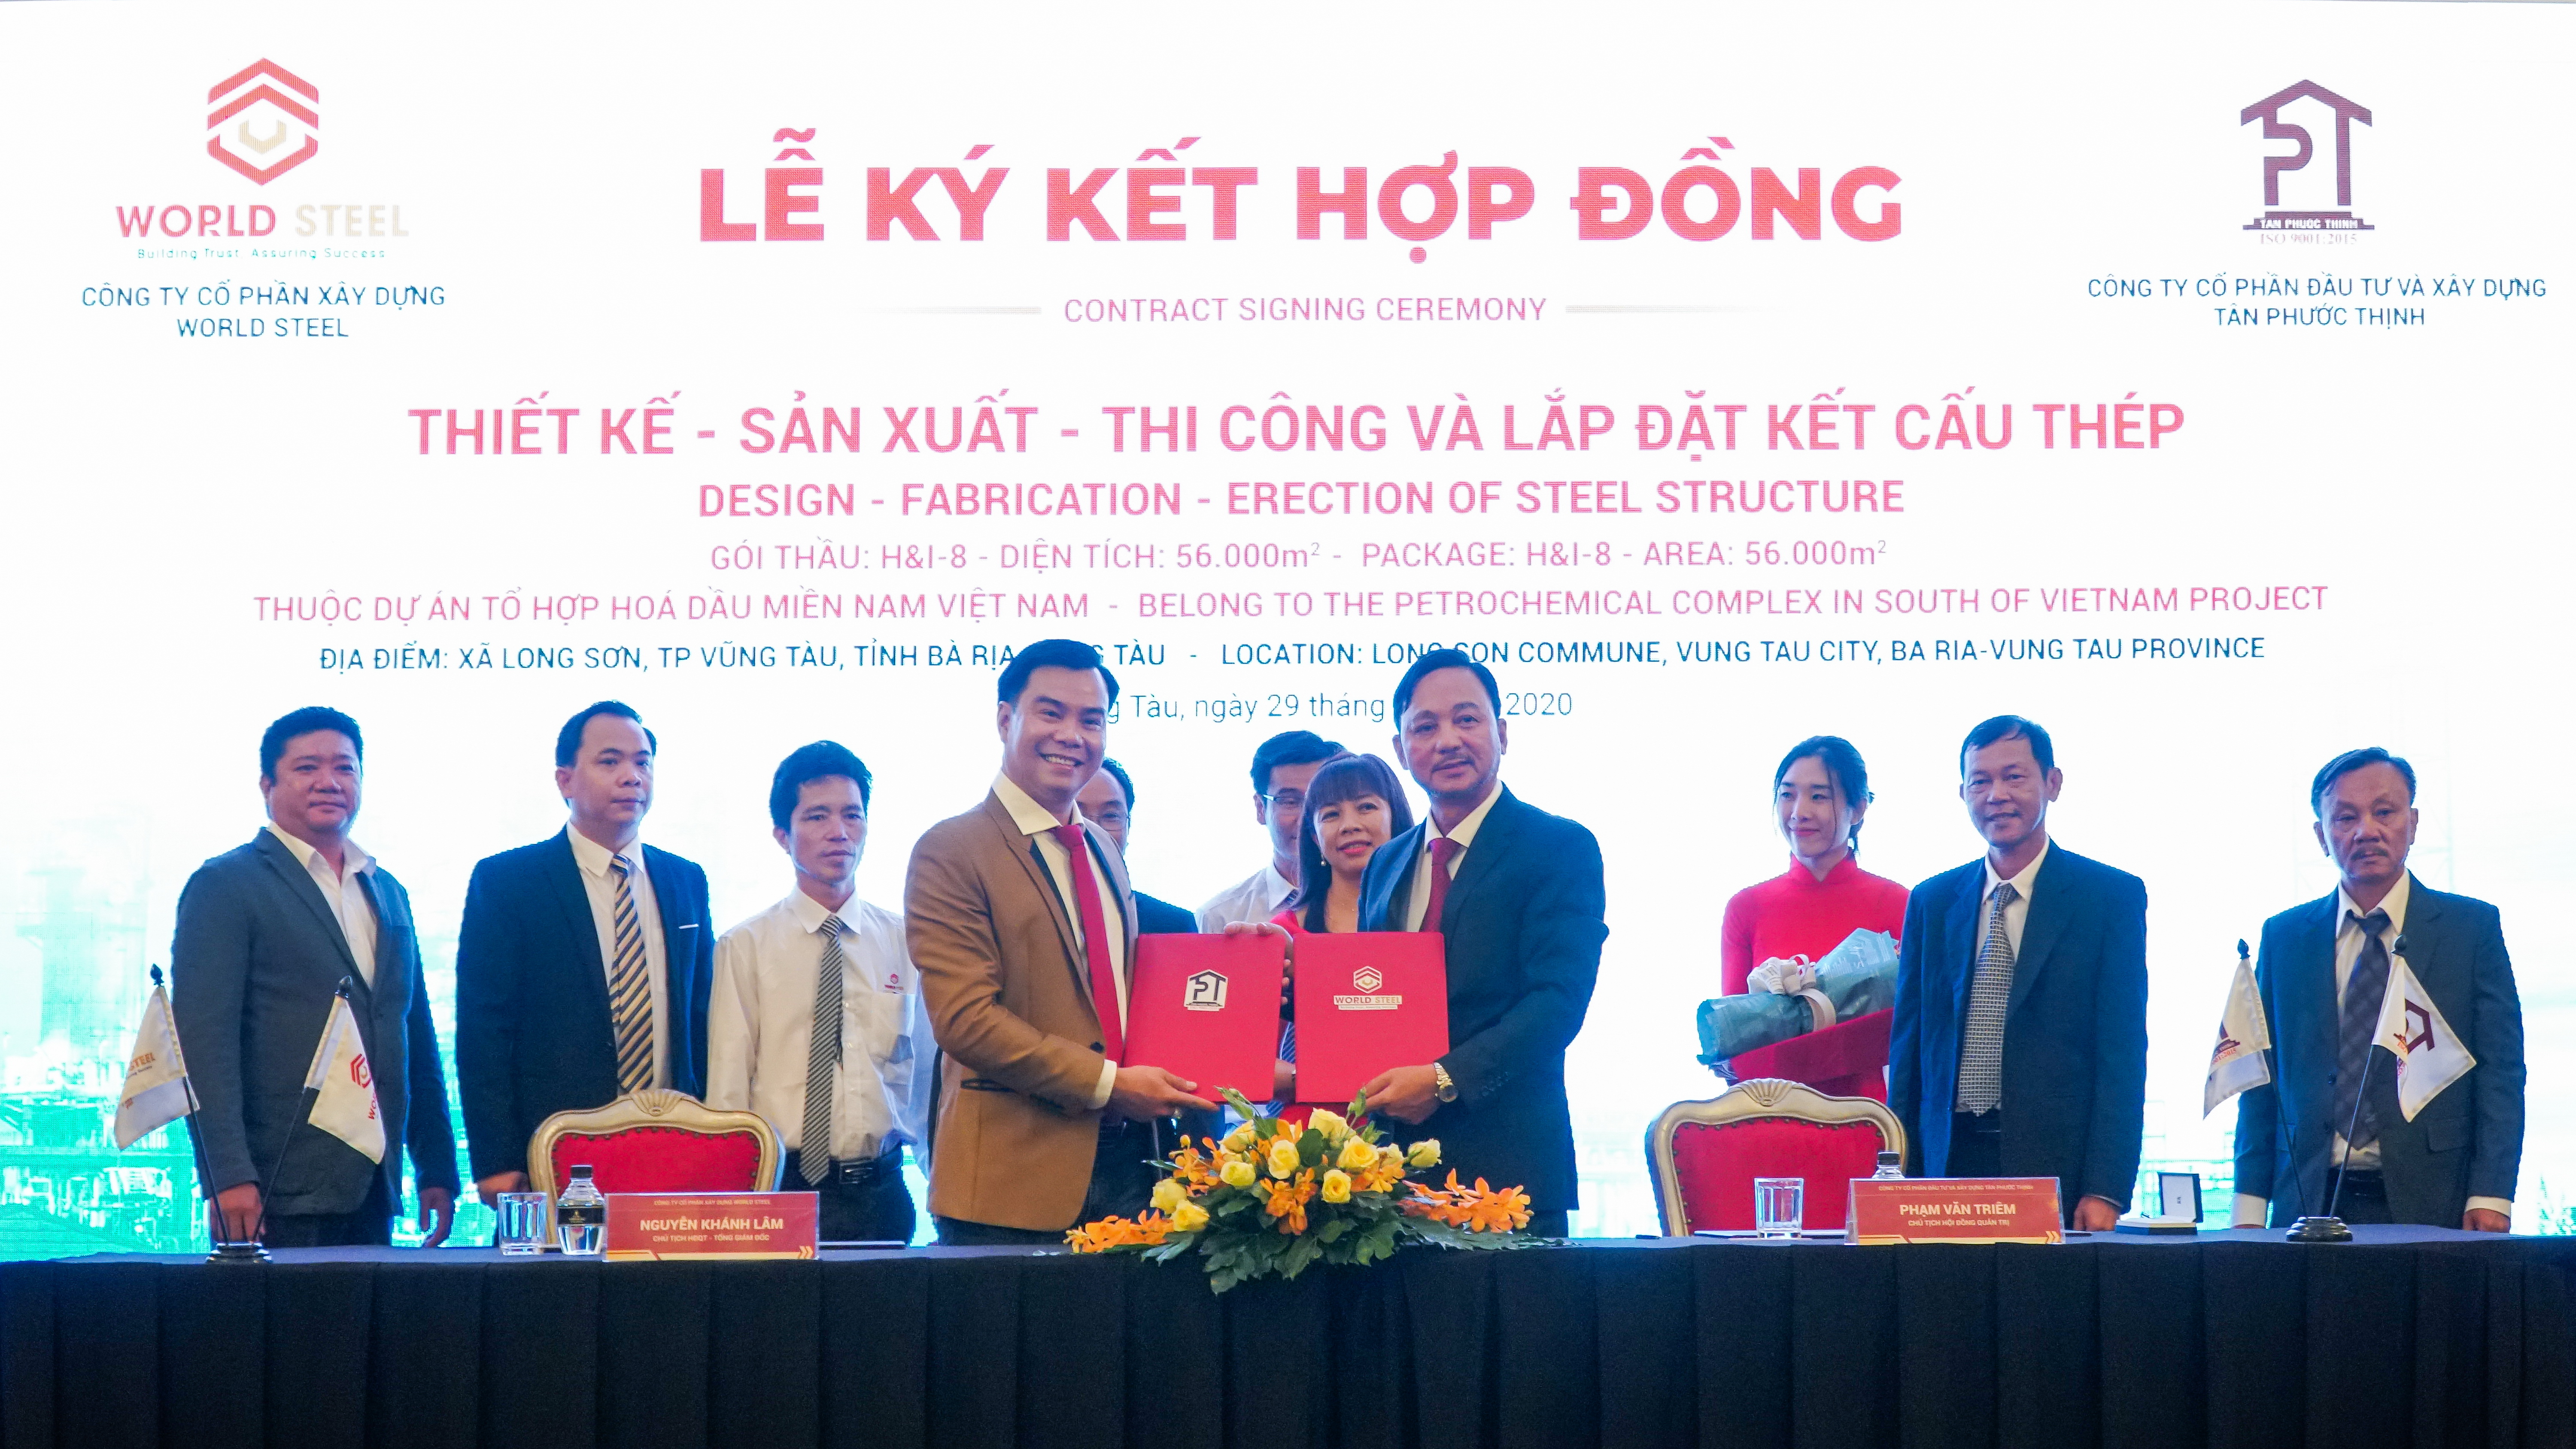 Nguyen Khanh Lam (L), chairman and CEO of World Steel Construction Joint Stock Company, and Pham Van Triem, chairman of Tan Phuoc Thinh Investment & Construction Joint Stock Company, pose for a photo during the contract signing ceremony.